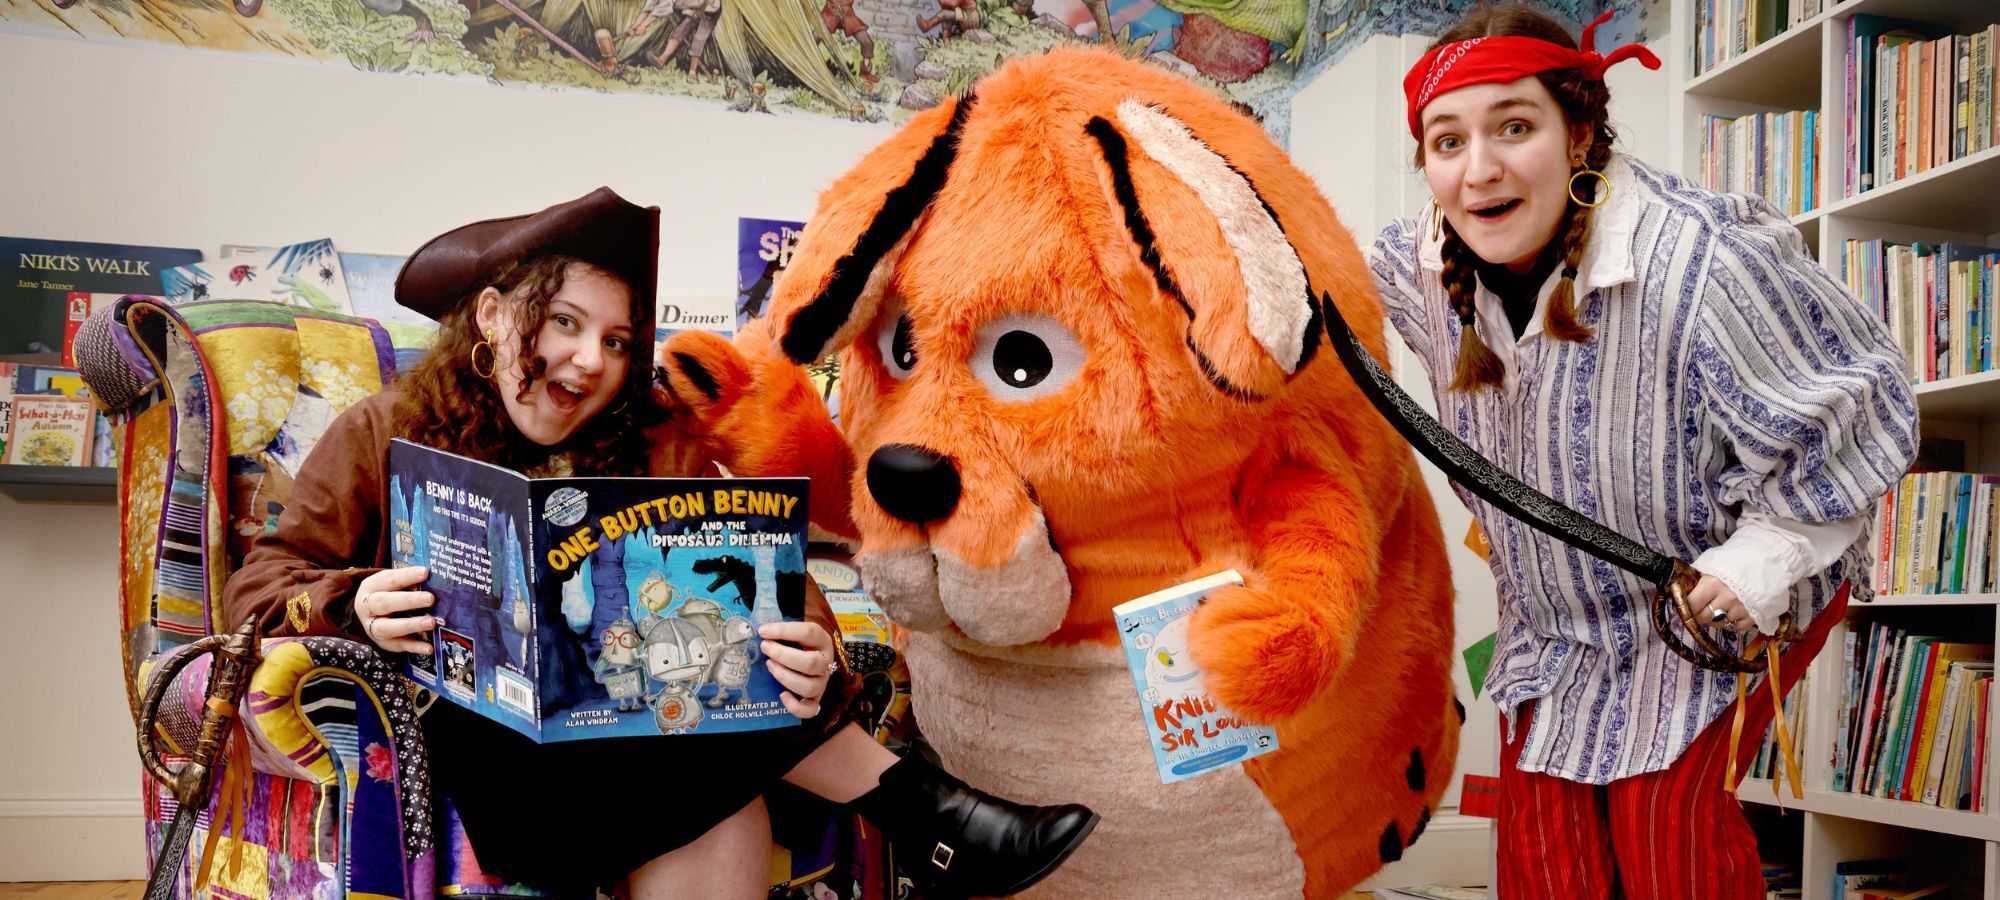 Two Moat Brae storyweavers are dressed as pirates, either side of Big DoG mascot; a large, orange dog.